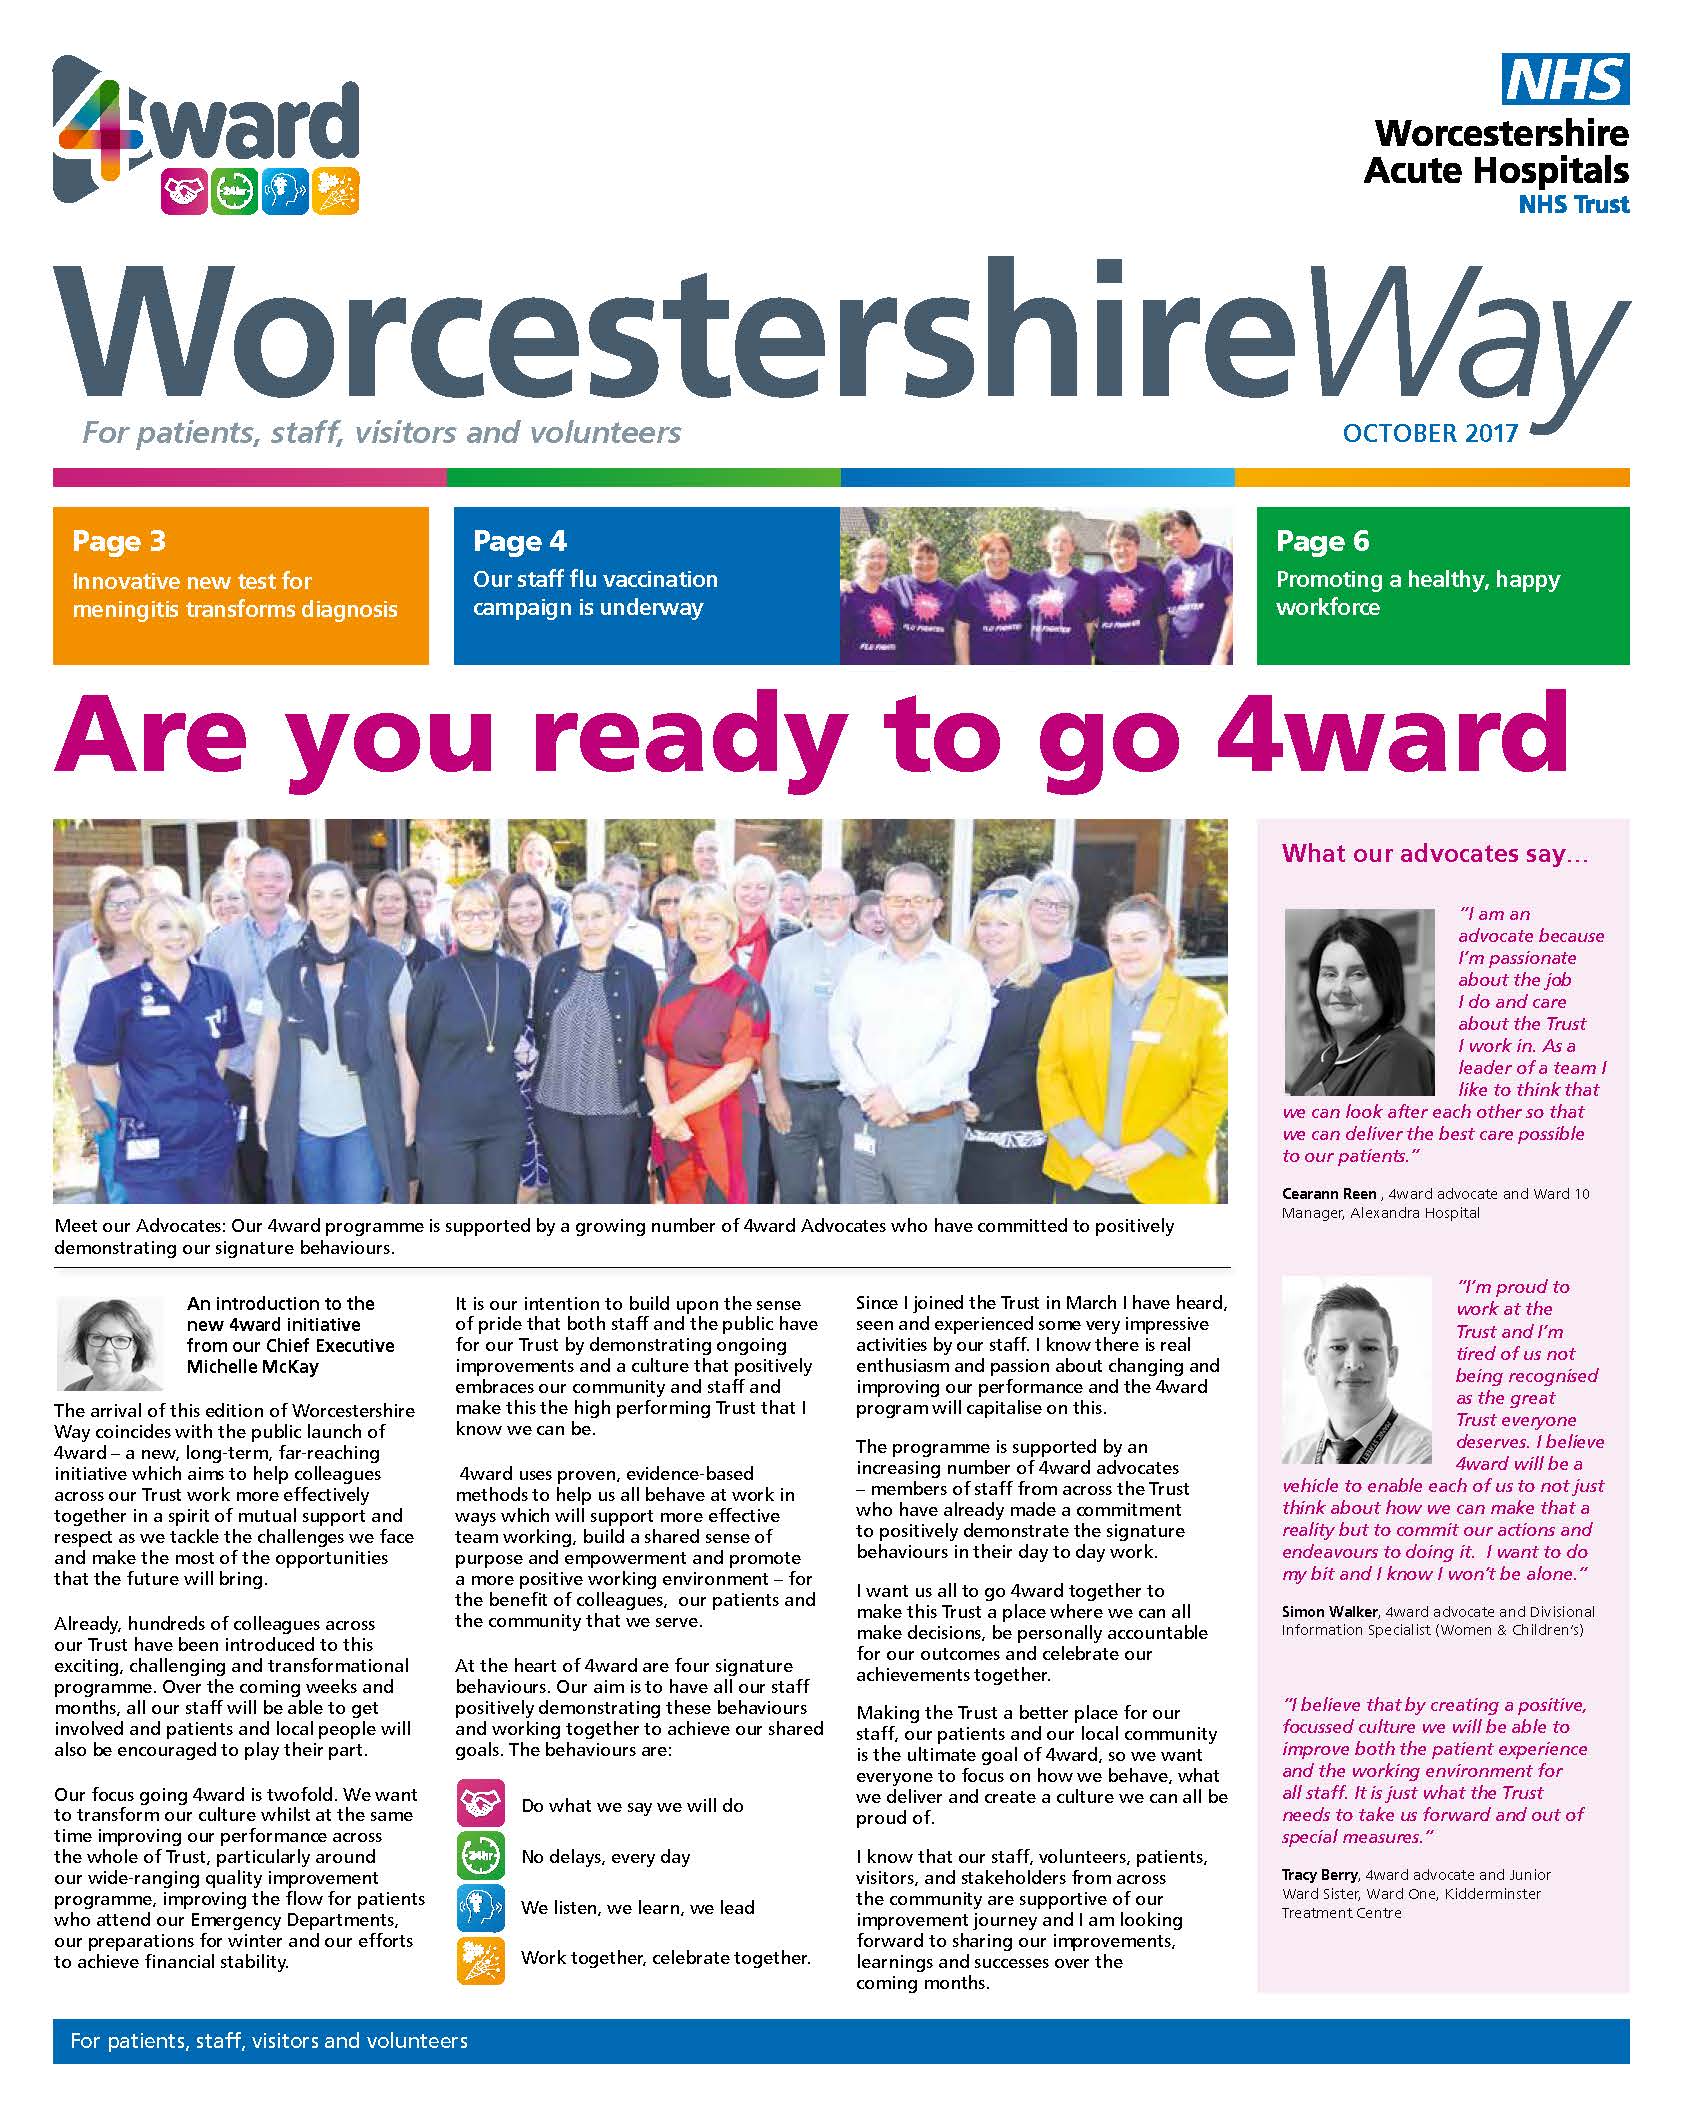 Worcestershire Way Oct 2017 web Page 1